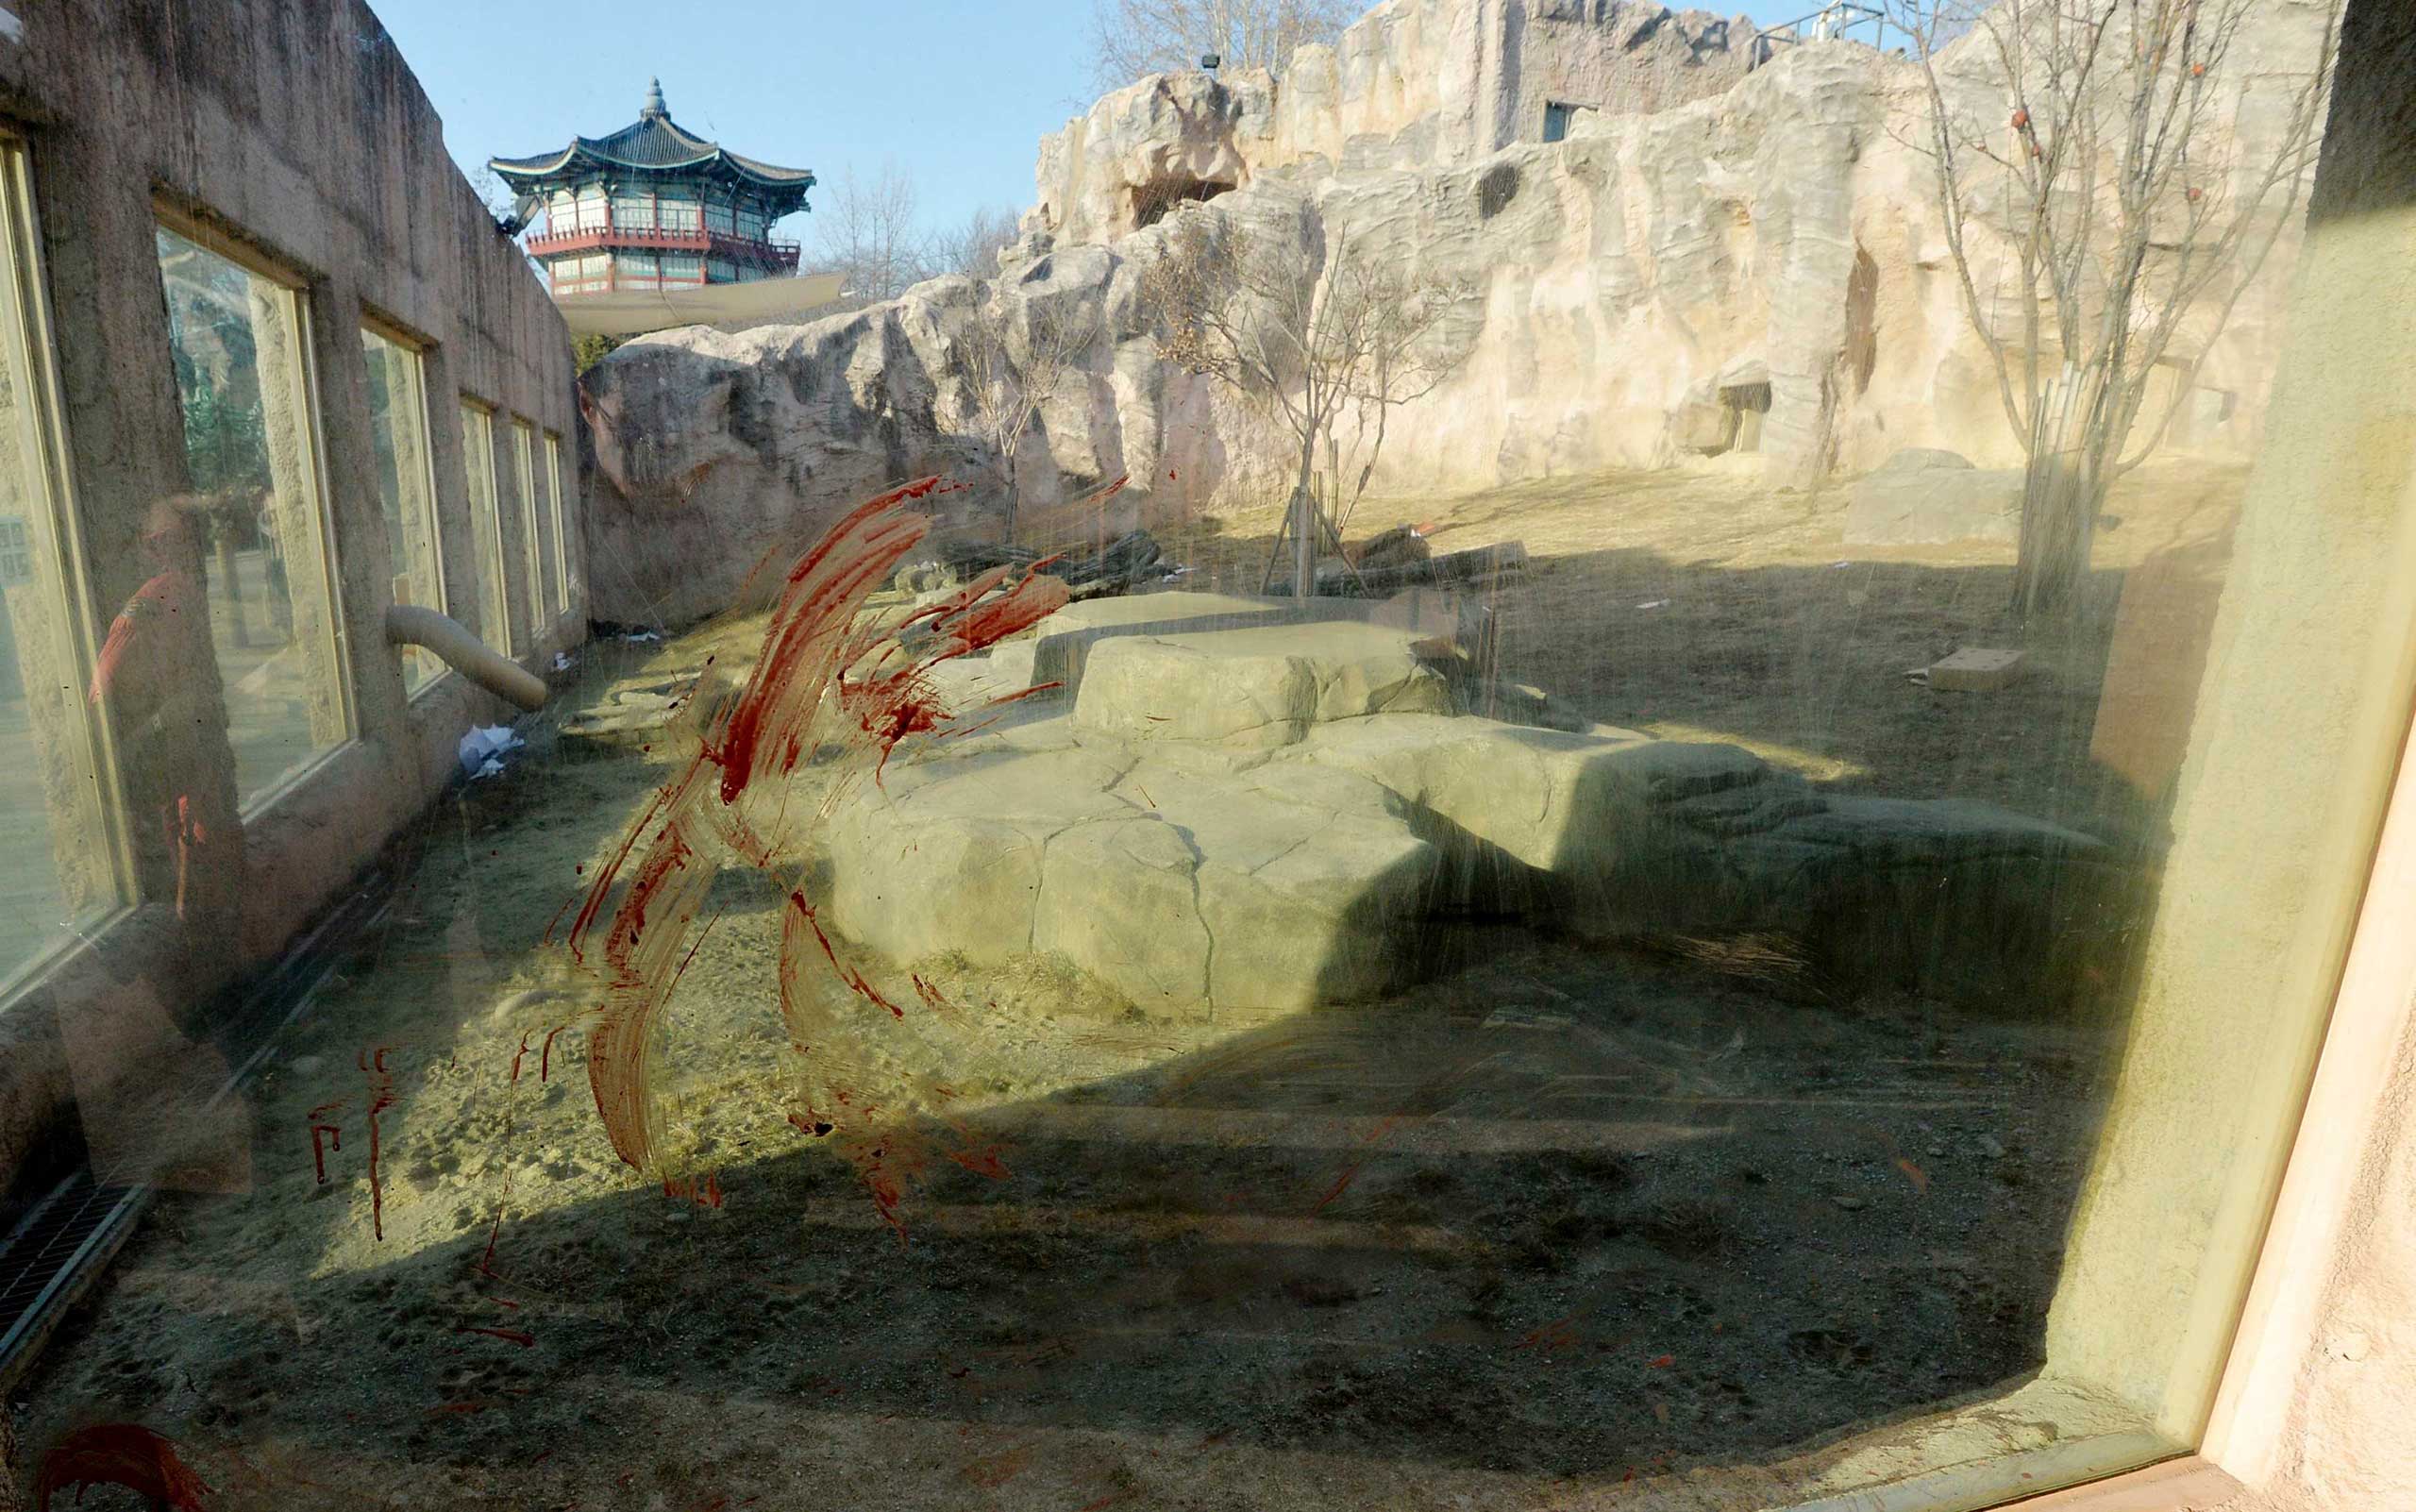 Feb. 12, 2015. A bloodstain is seen on the window of a lion enclosure at the Children's Grand Park Zoo in central Seoul. A lion at the zoo mauled a keeper to death after the man entered its cage to install equipment.